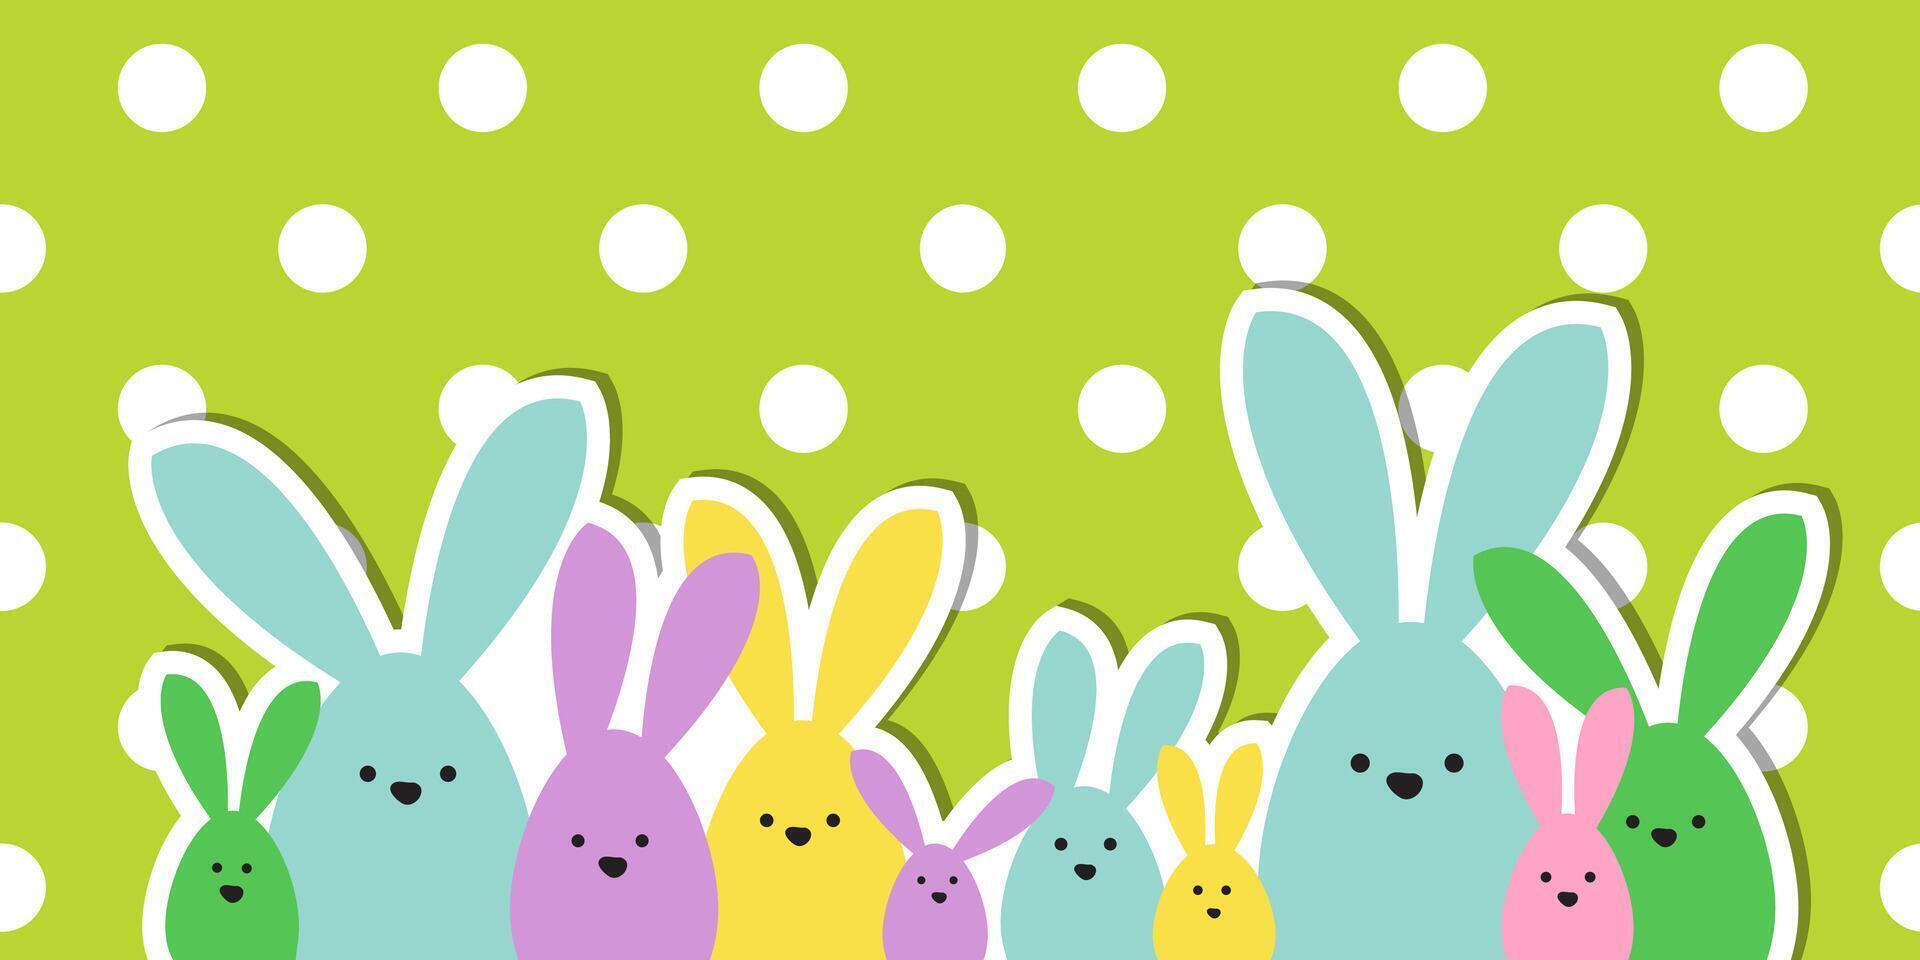 Celebration Greeting Easter card, colorful easter bunny family on polka dot background vector